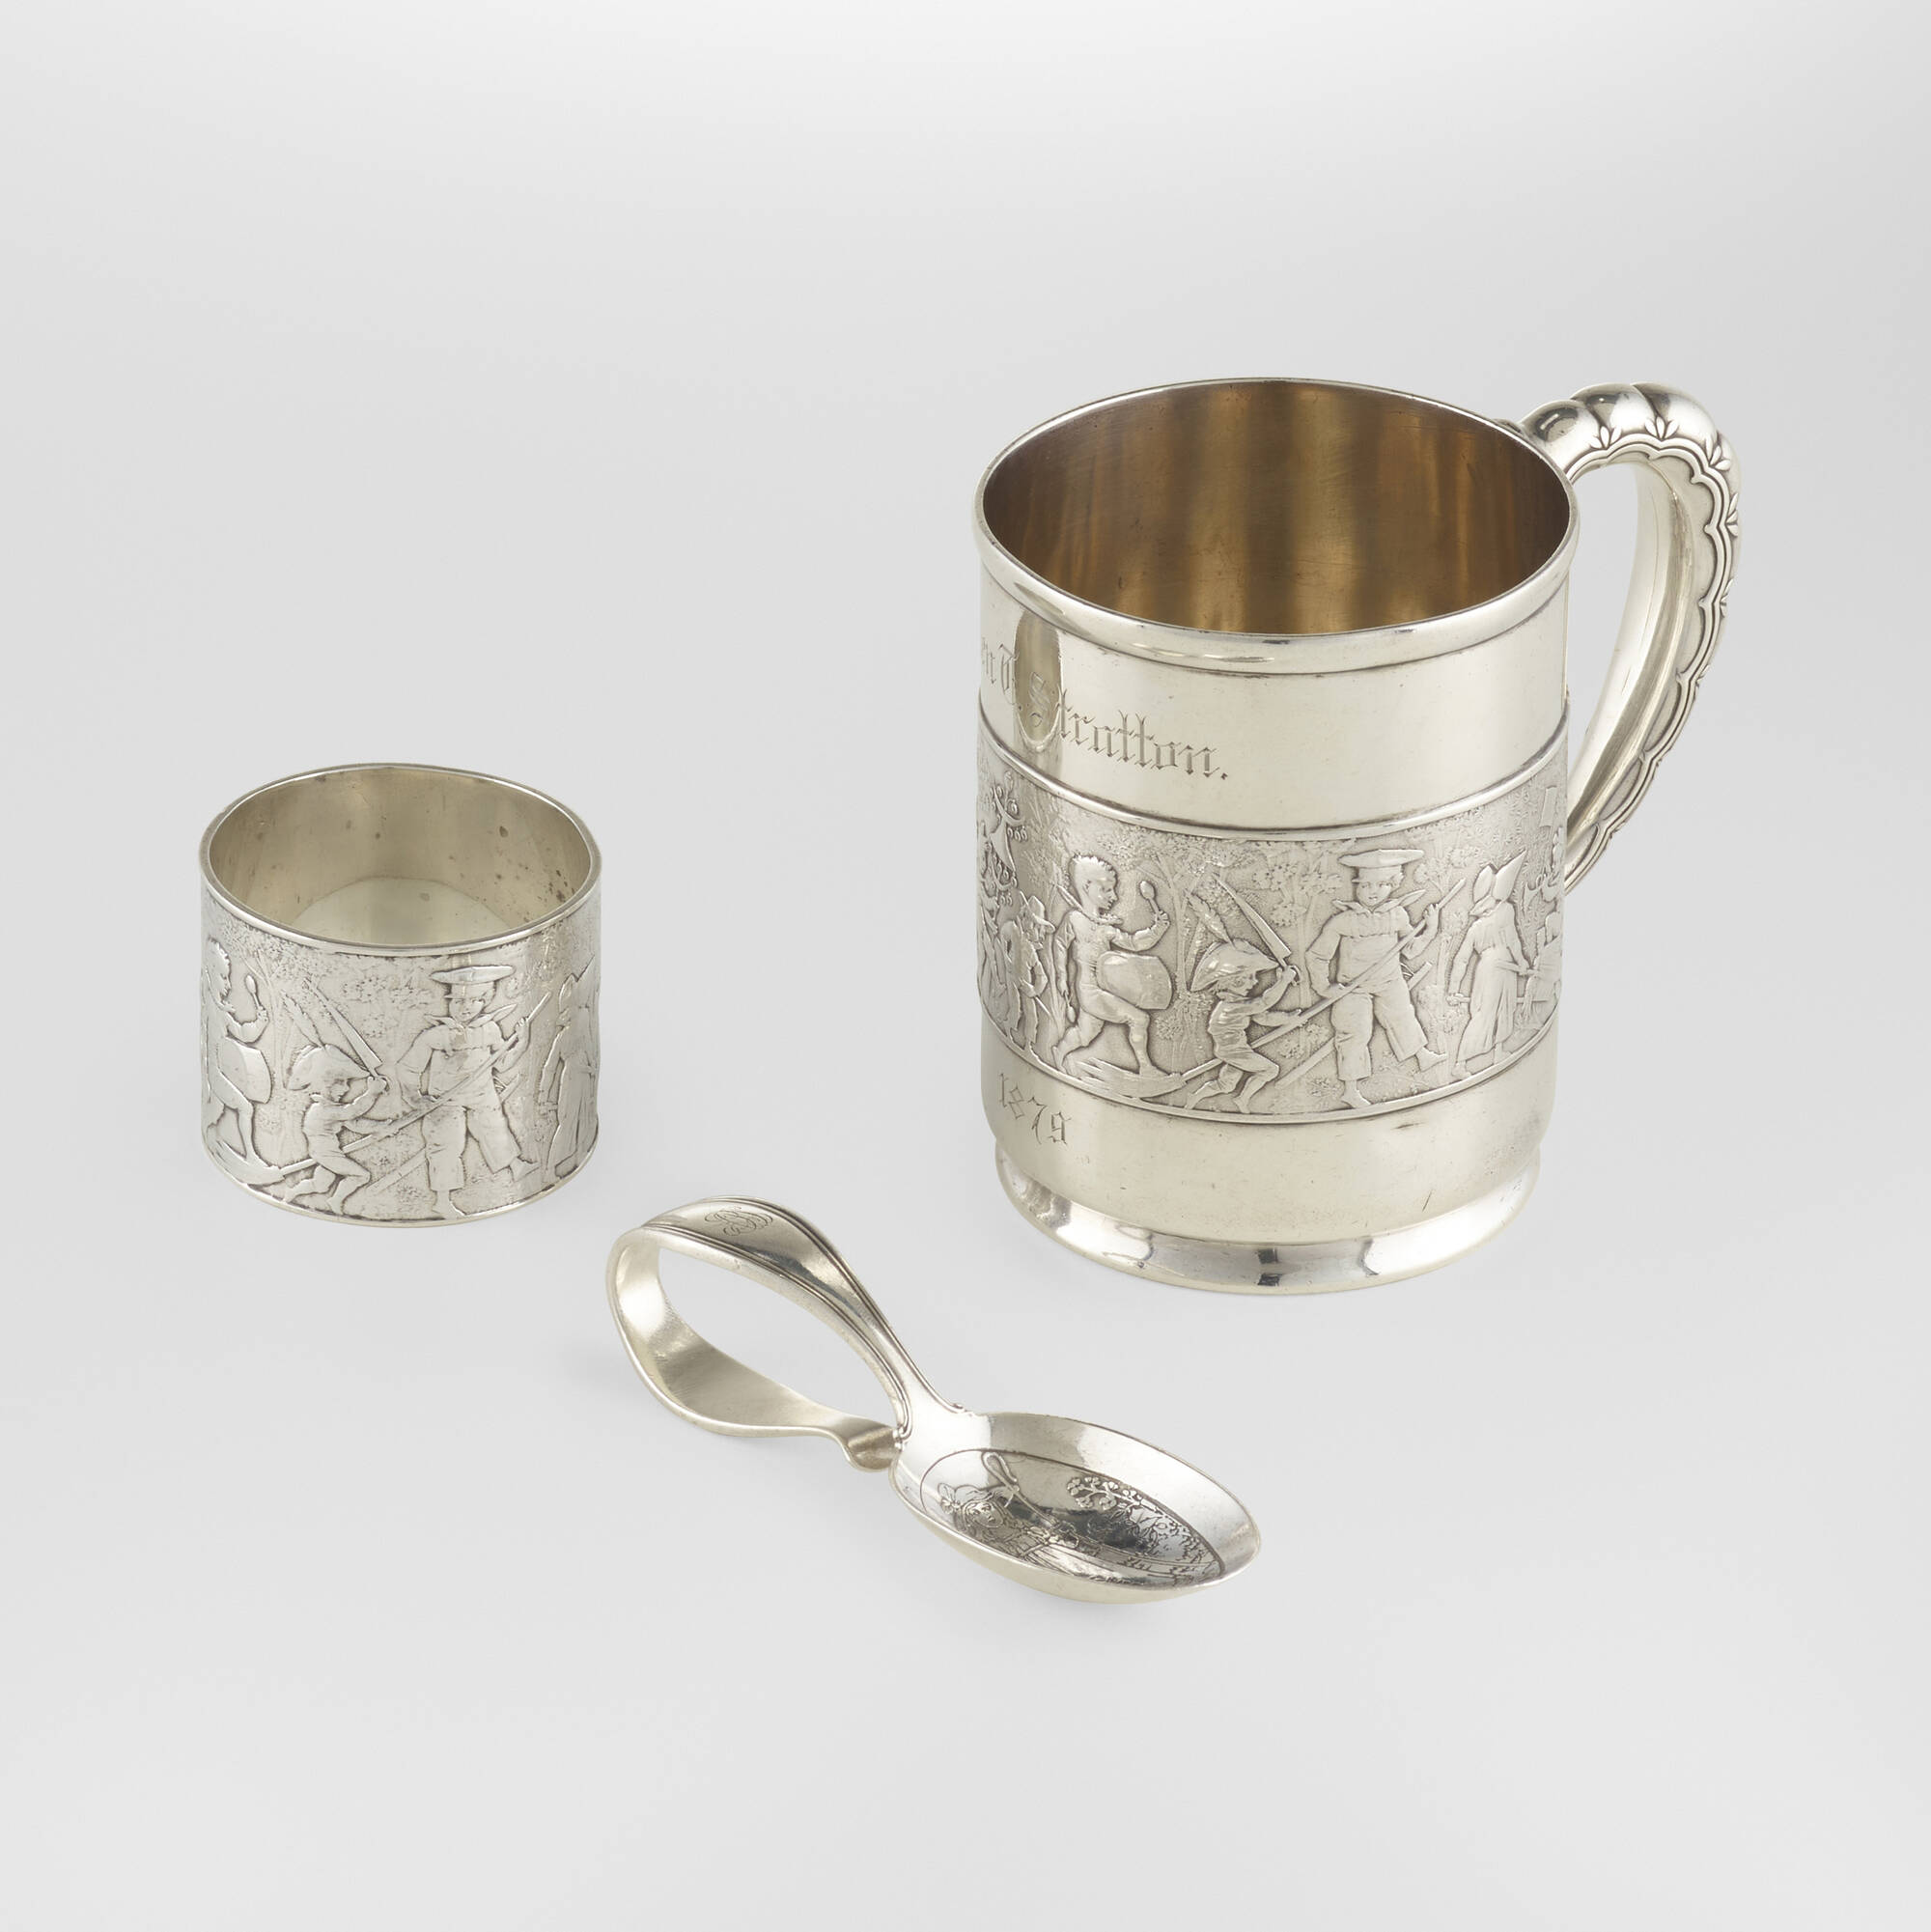 Sold at Auction: Tiffany & Co. Aesthetic Movement mug with an